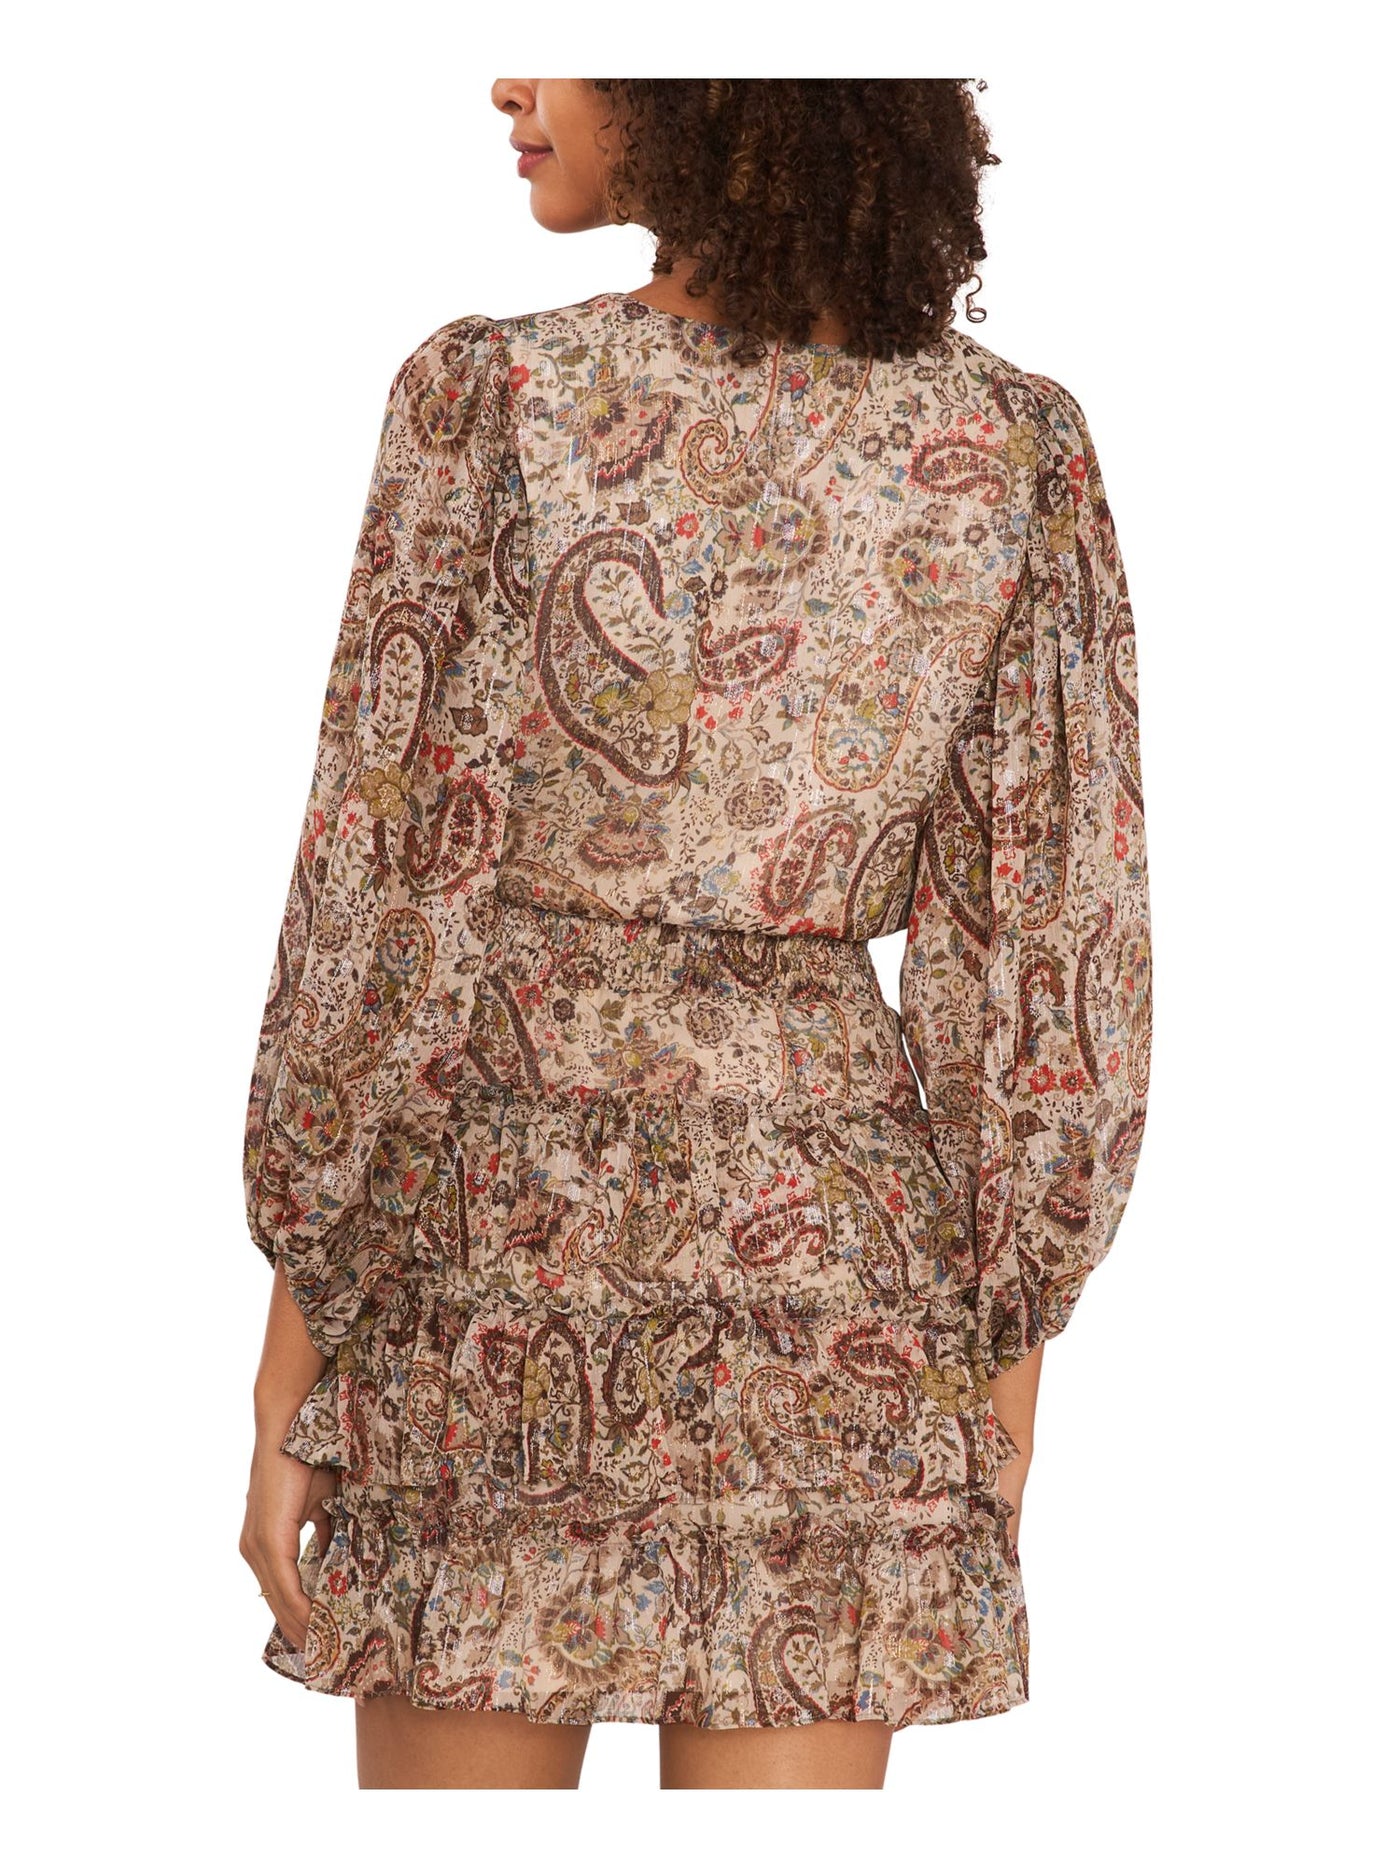 VINCE CAMUTO Womens Beige Smocked Ruffled Tiered Skirt Lined Paisley 3/4 Sleeve V Neck Mini Fit + Flare Dress XS